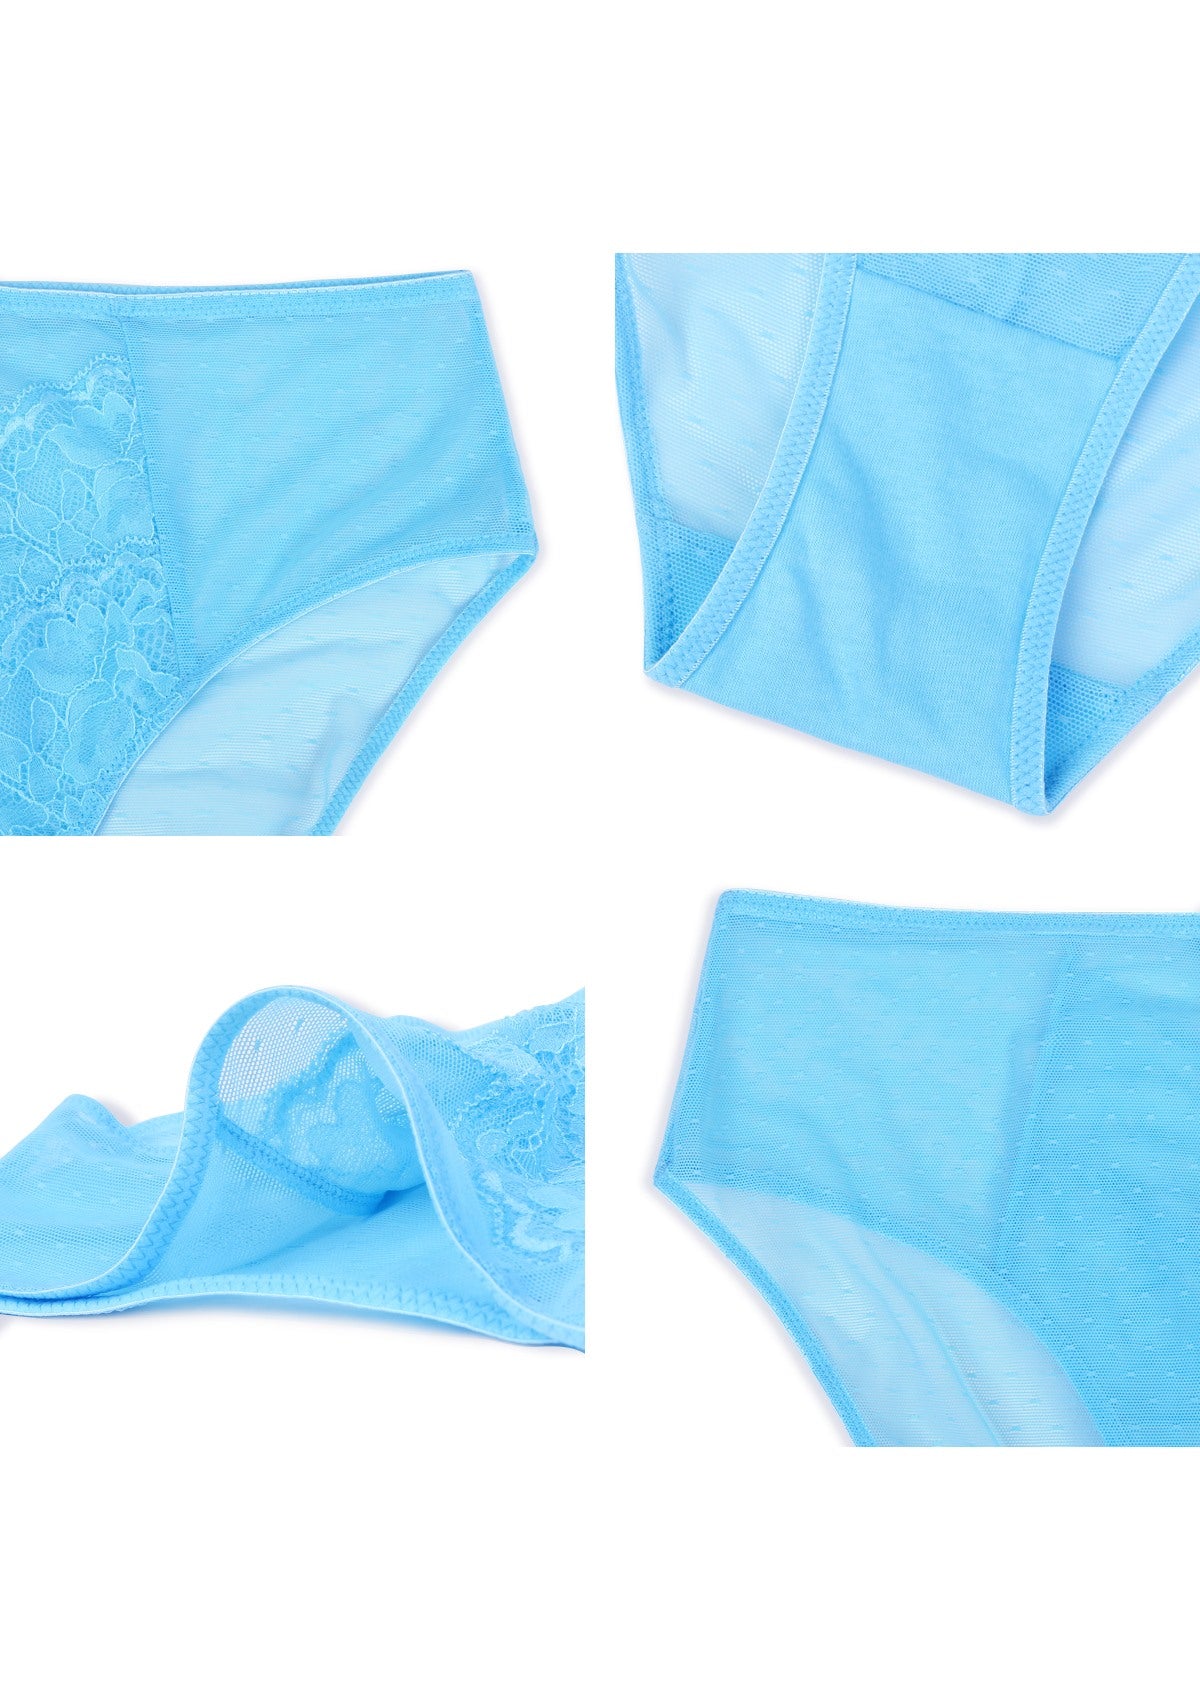 HSIA Enchante High-Rise Floral Lacy Panty-Comfort In Style - XXXL / Capri Blue